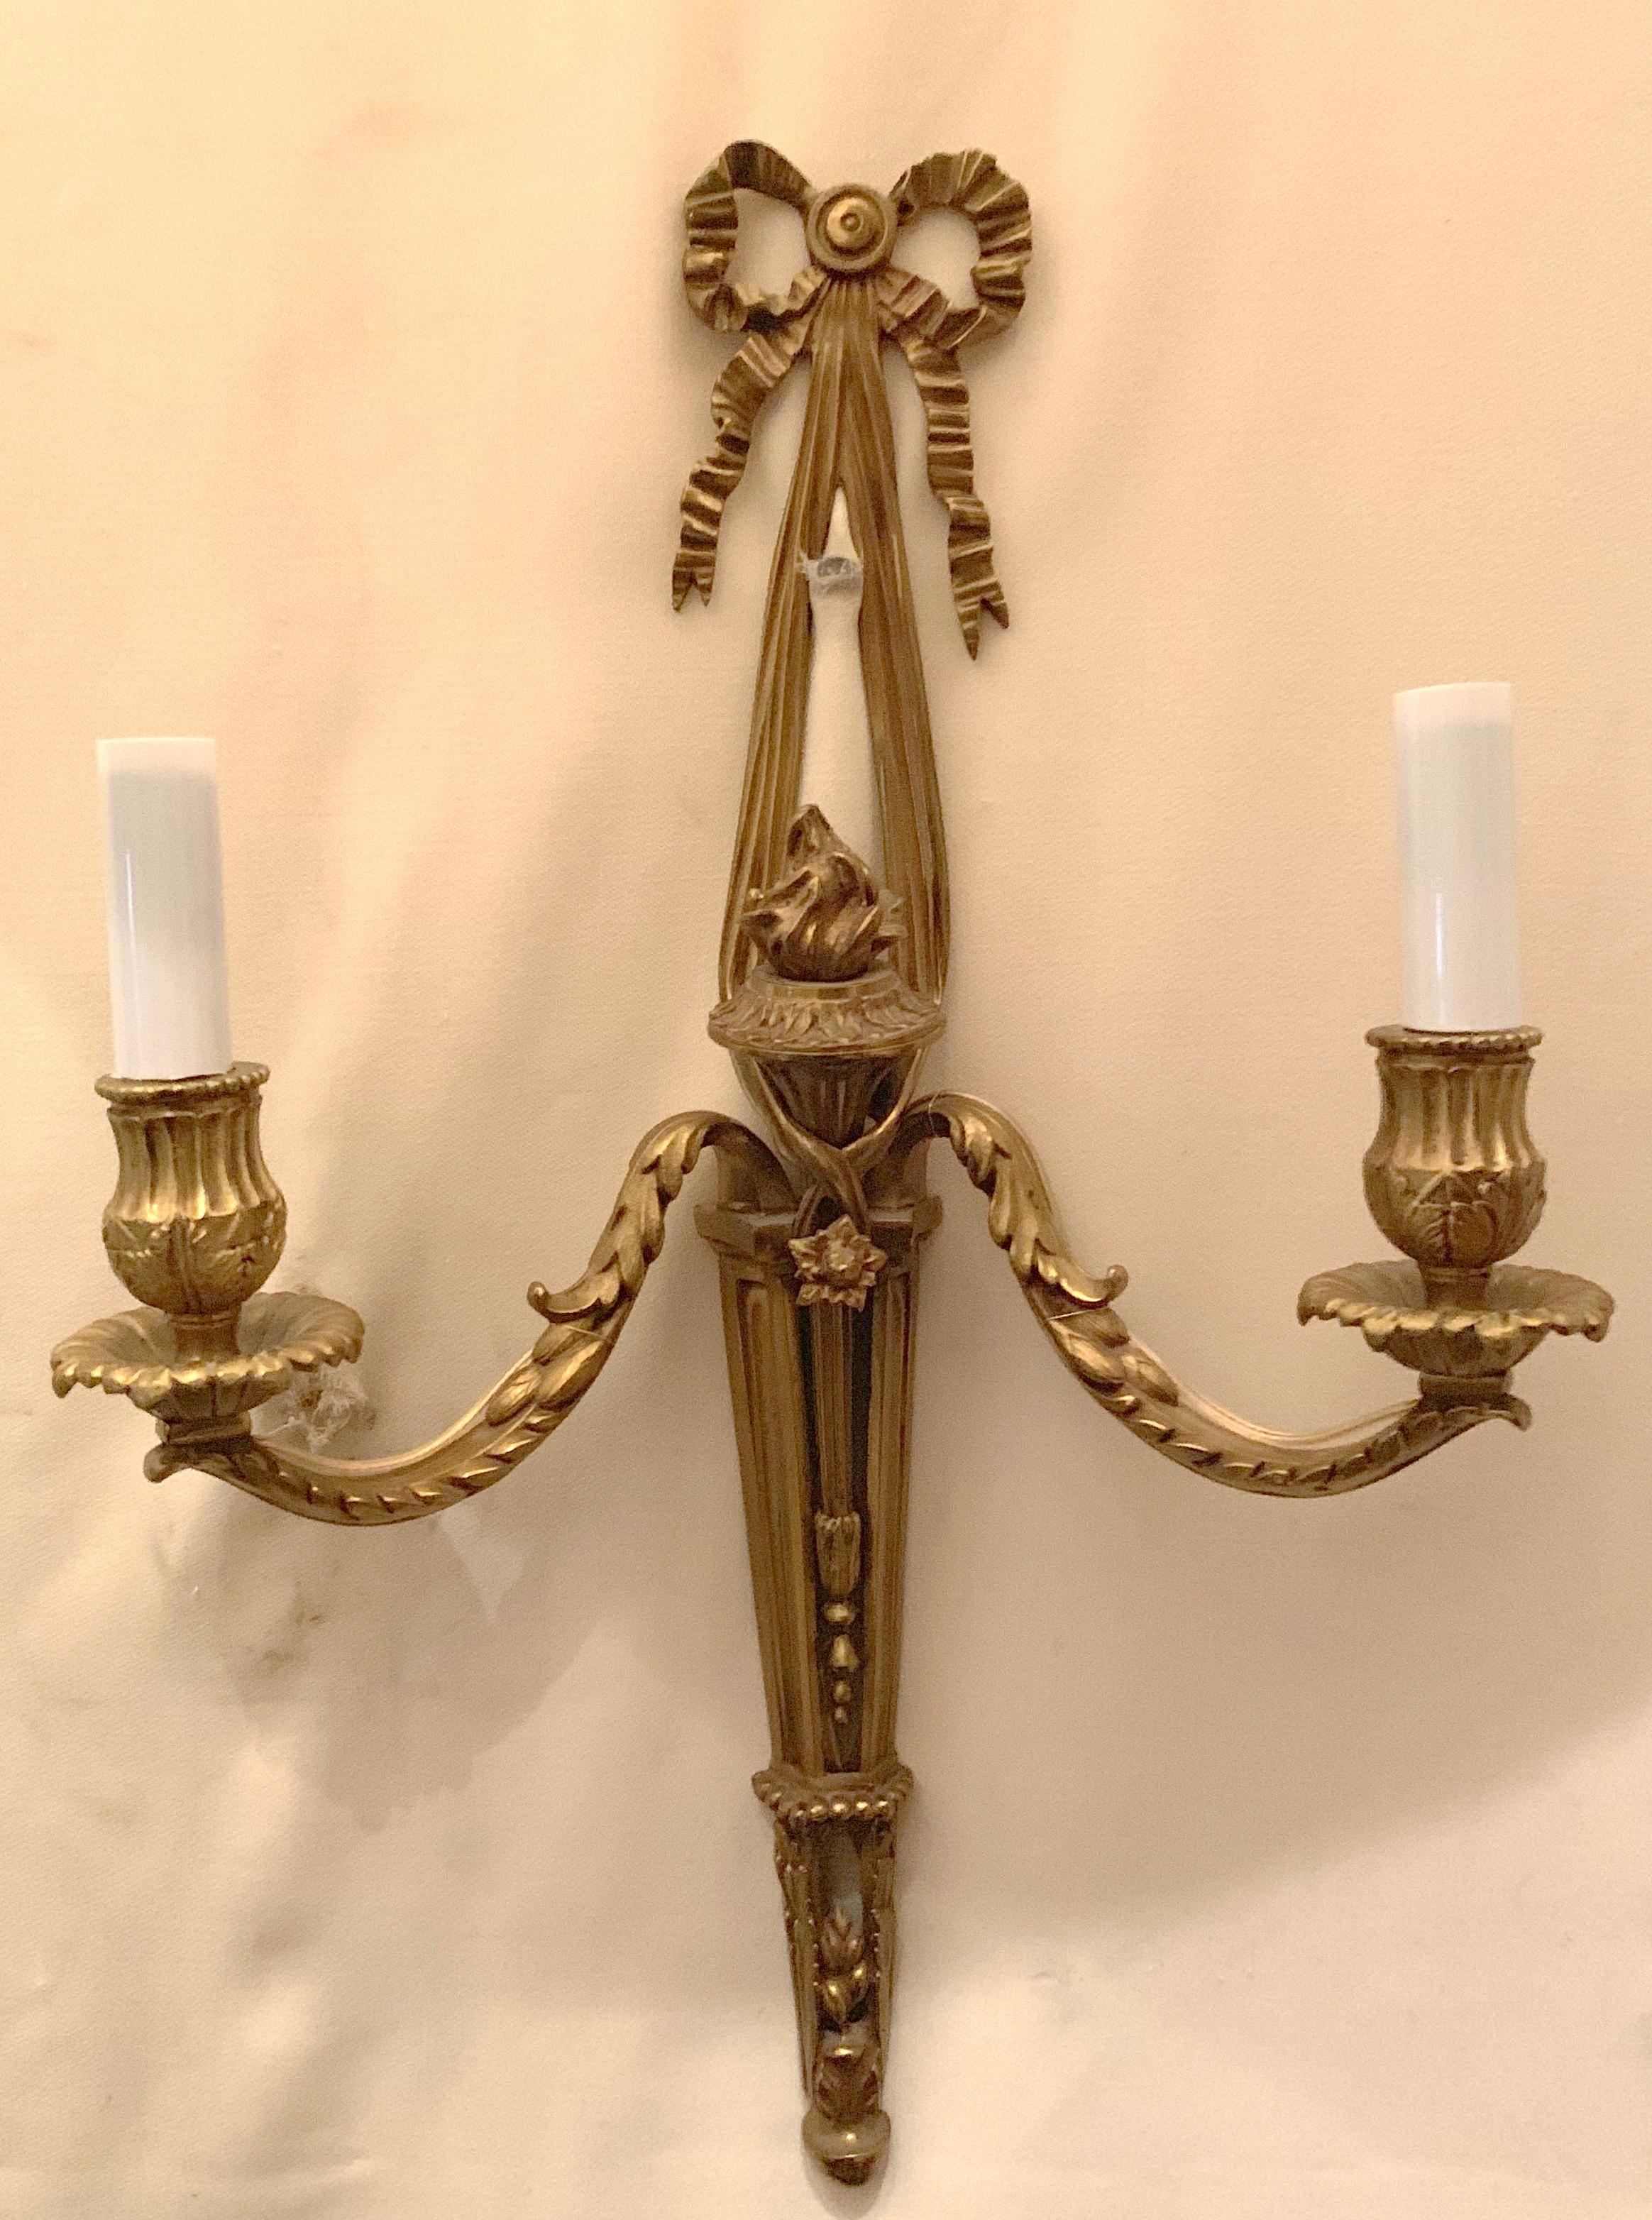 A wonderful pair of French neoclassical style bronze urn, bow, tassel and filigree 2-arm sconces
Completely rewired with new sockets and wiring.